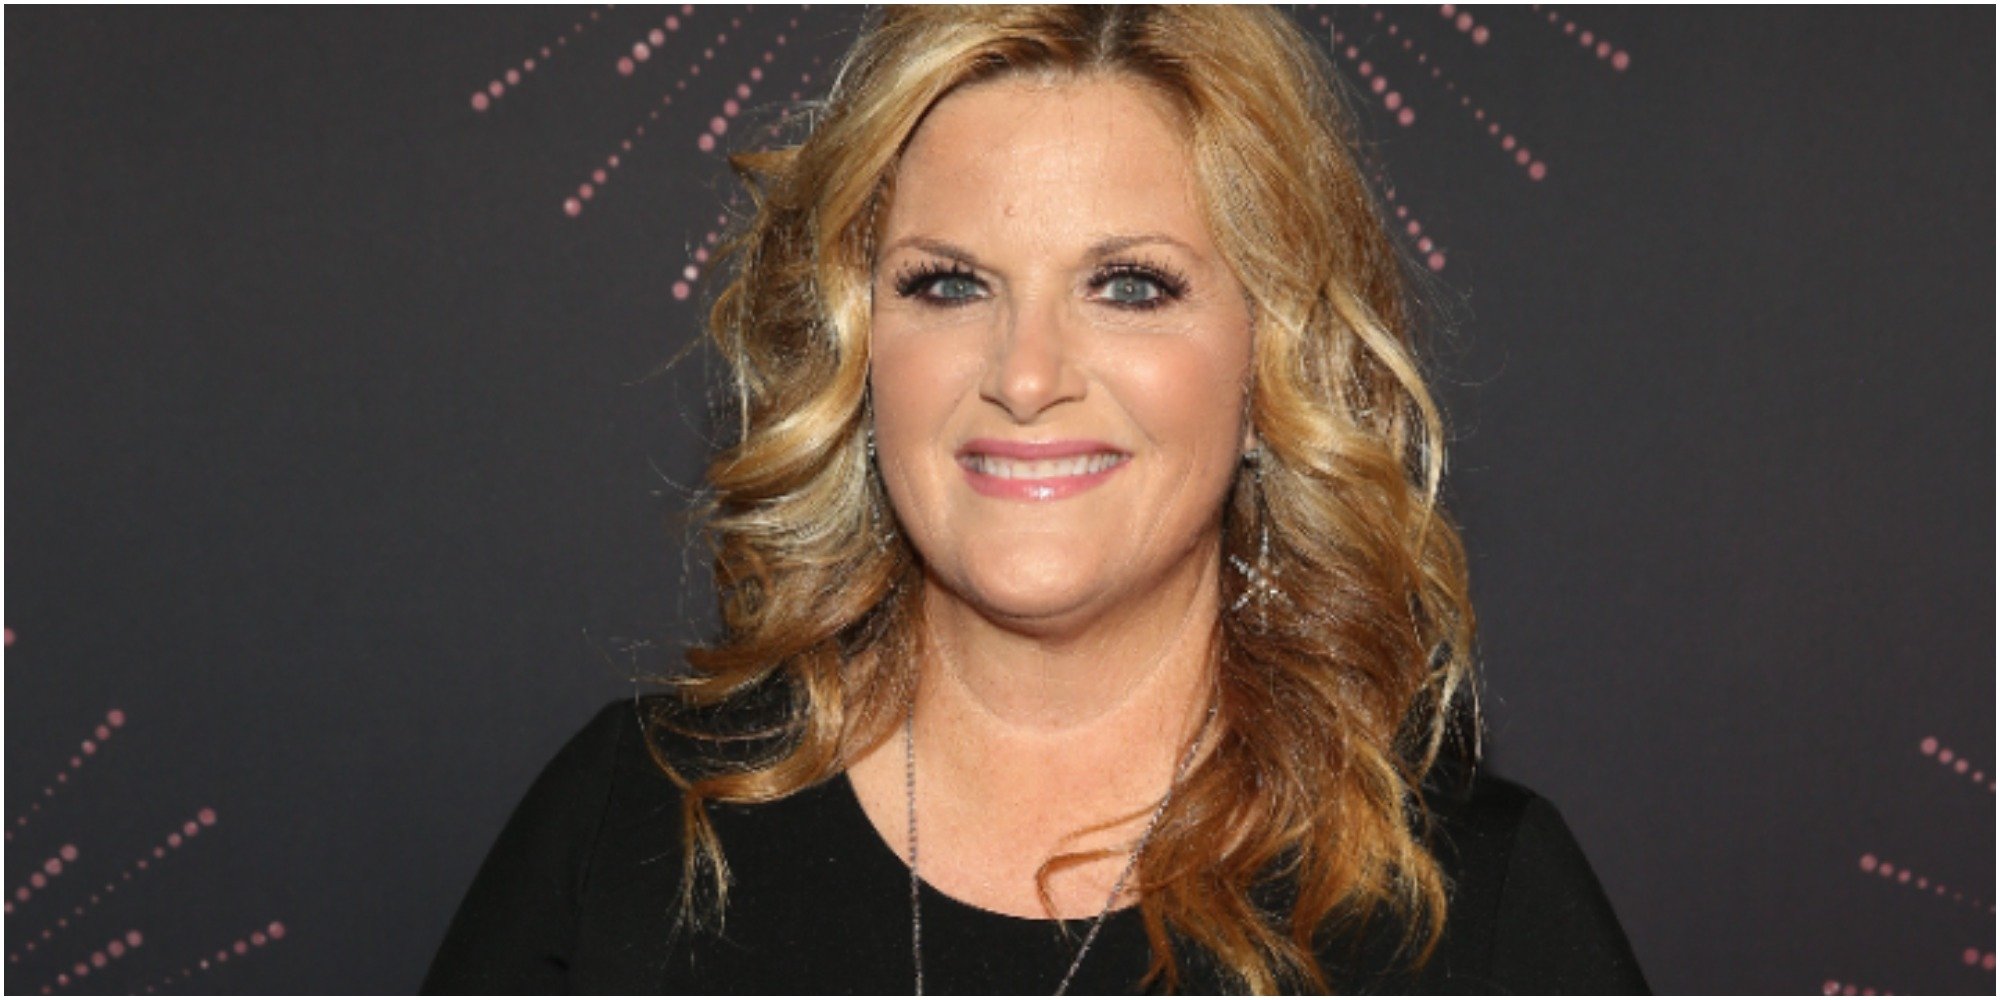 Trisha Yearwood wearing a black top smiling in front of a black background.